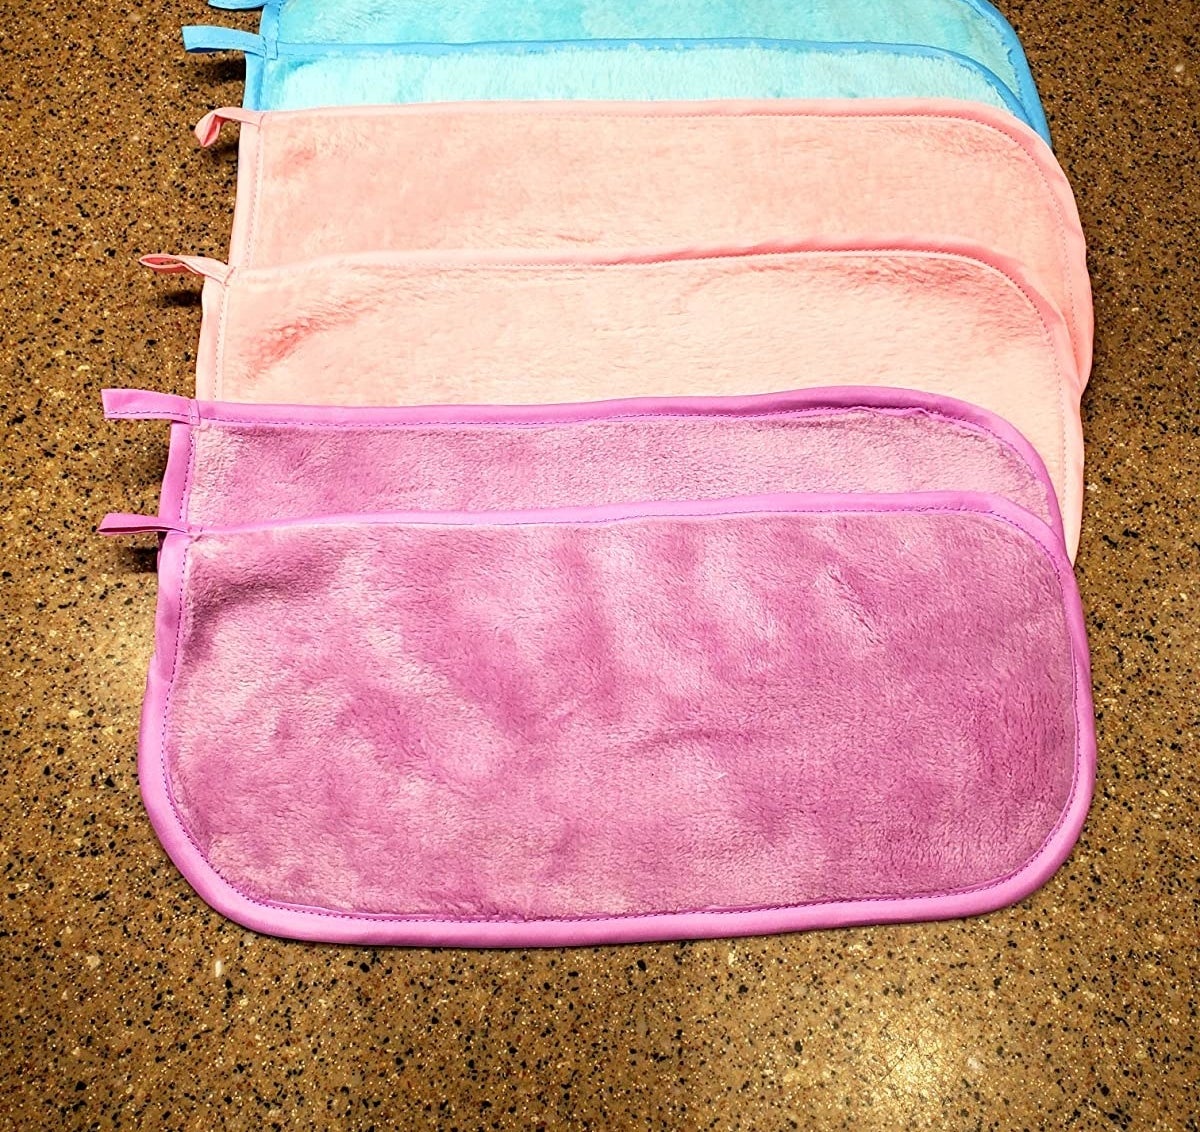 Reviewer image of six makeup remover towels